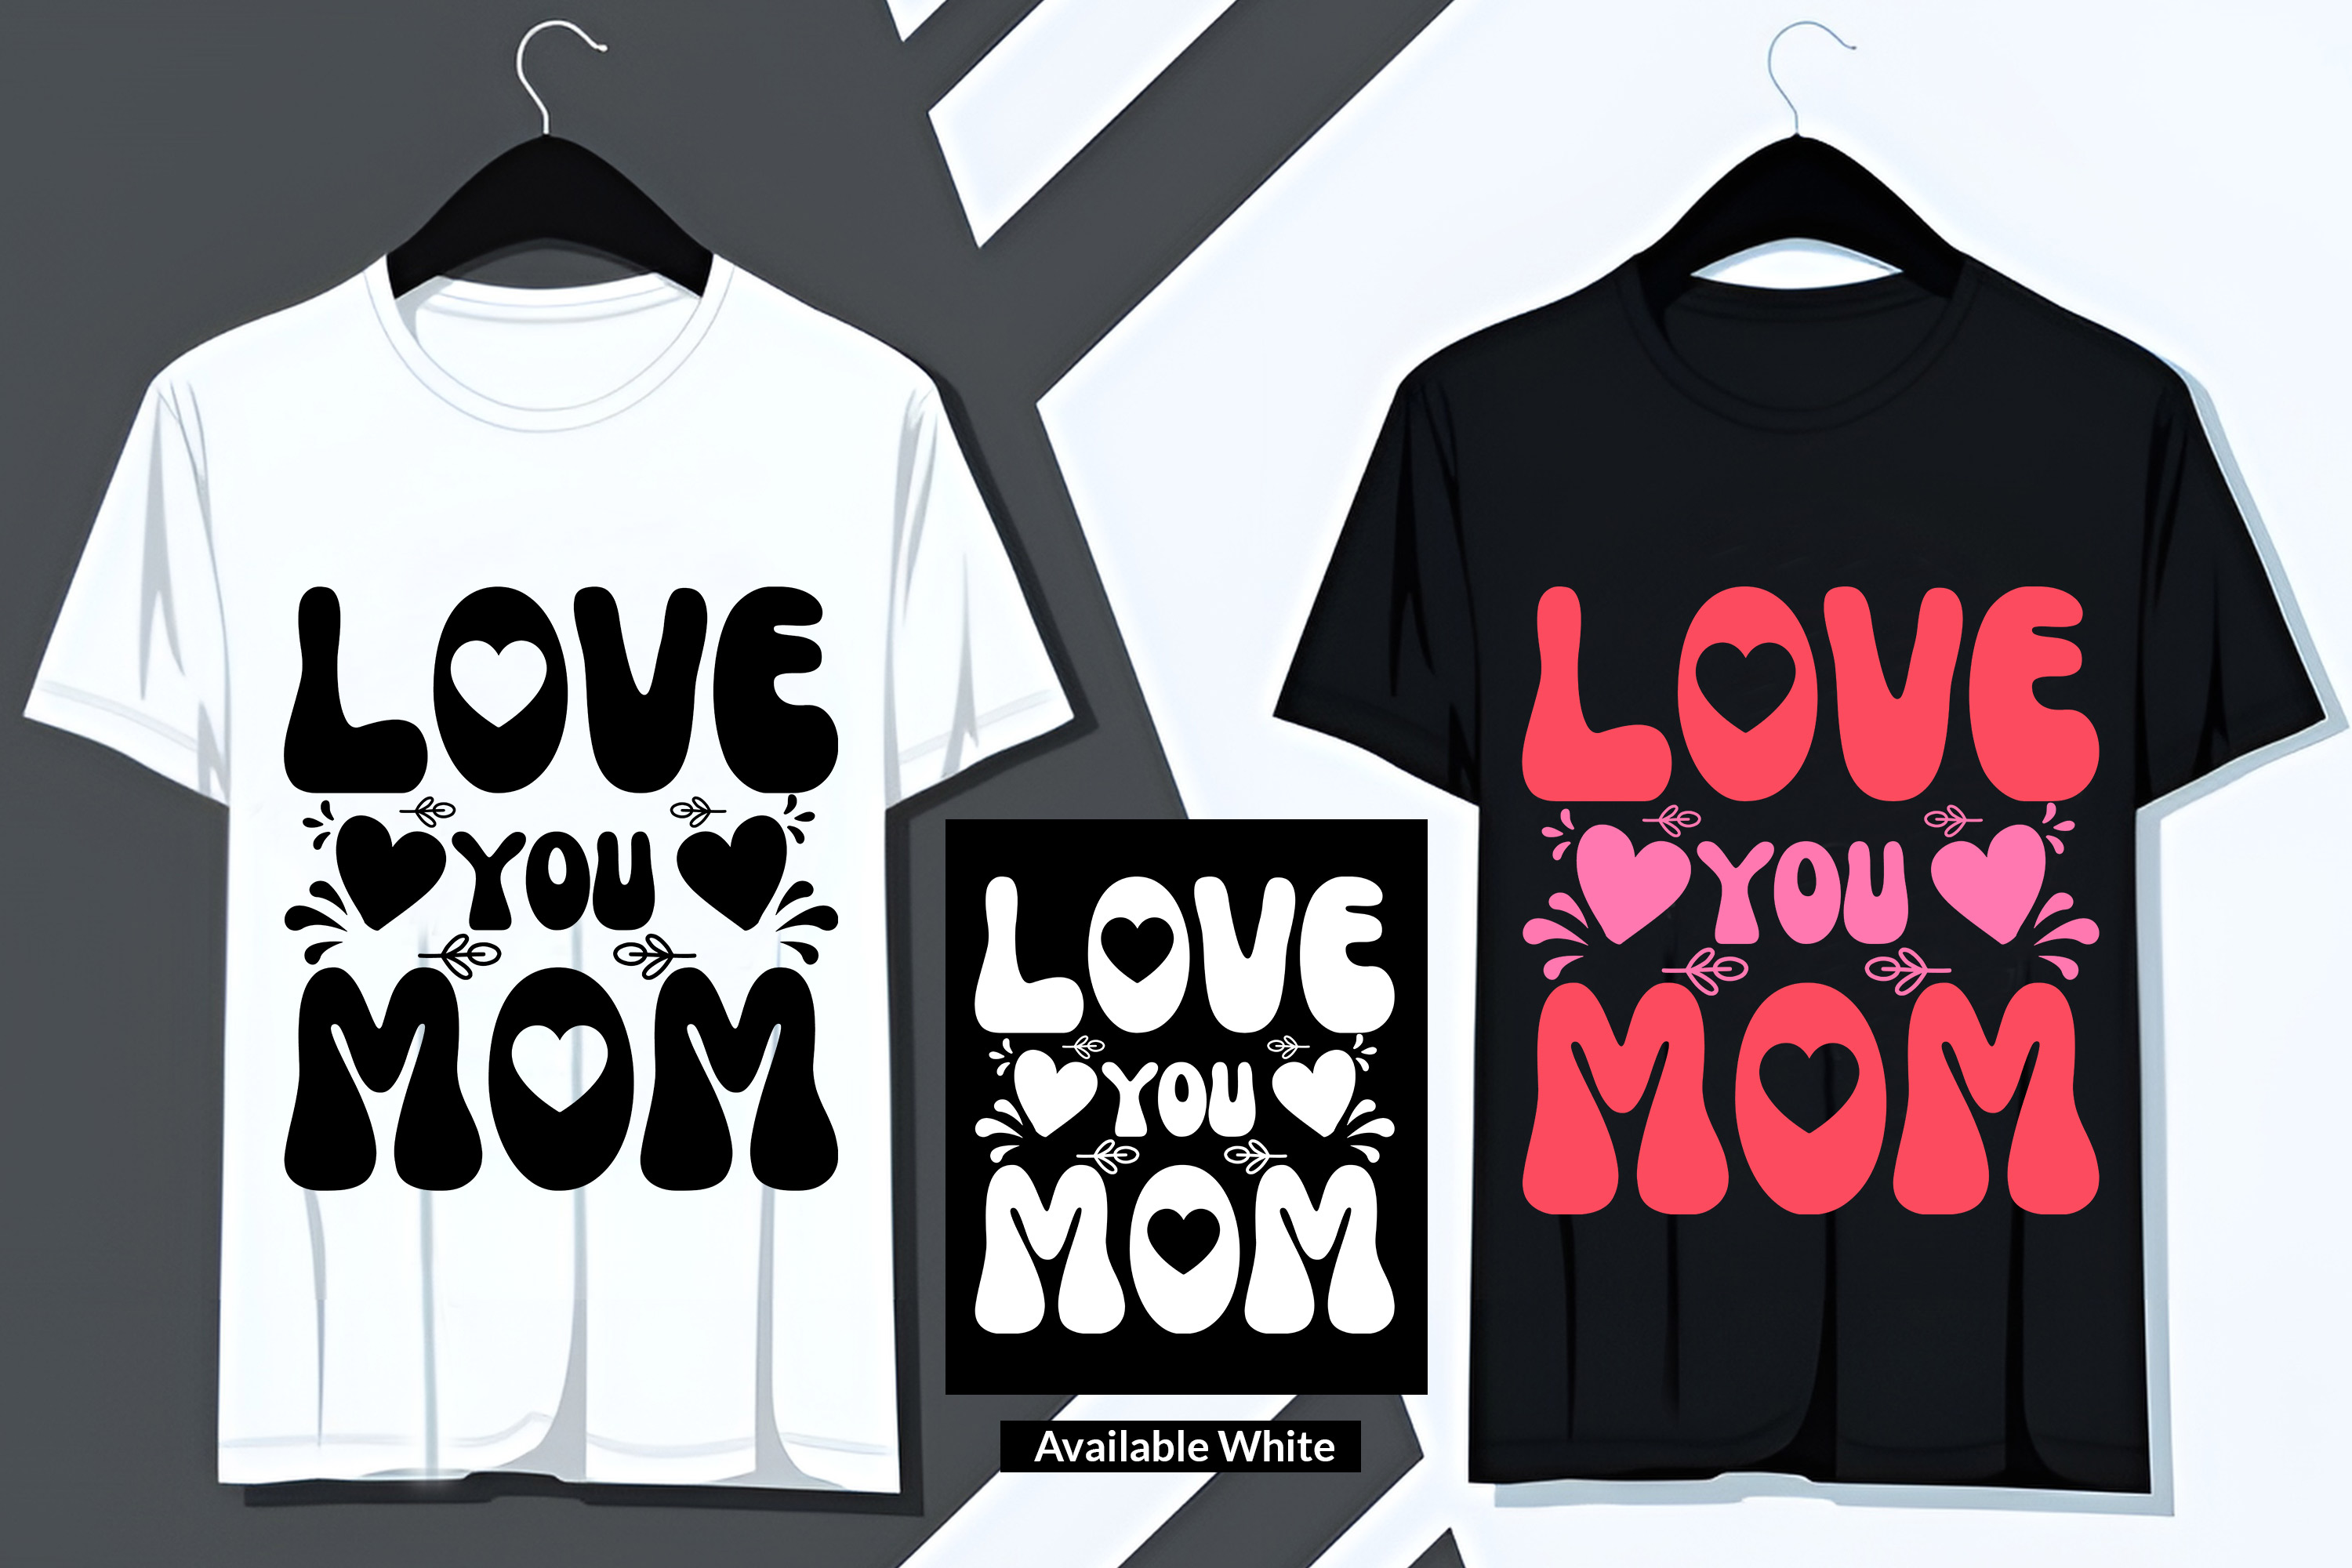 Two t - shirts with the words love you mom and love you mom on them.